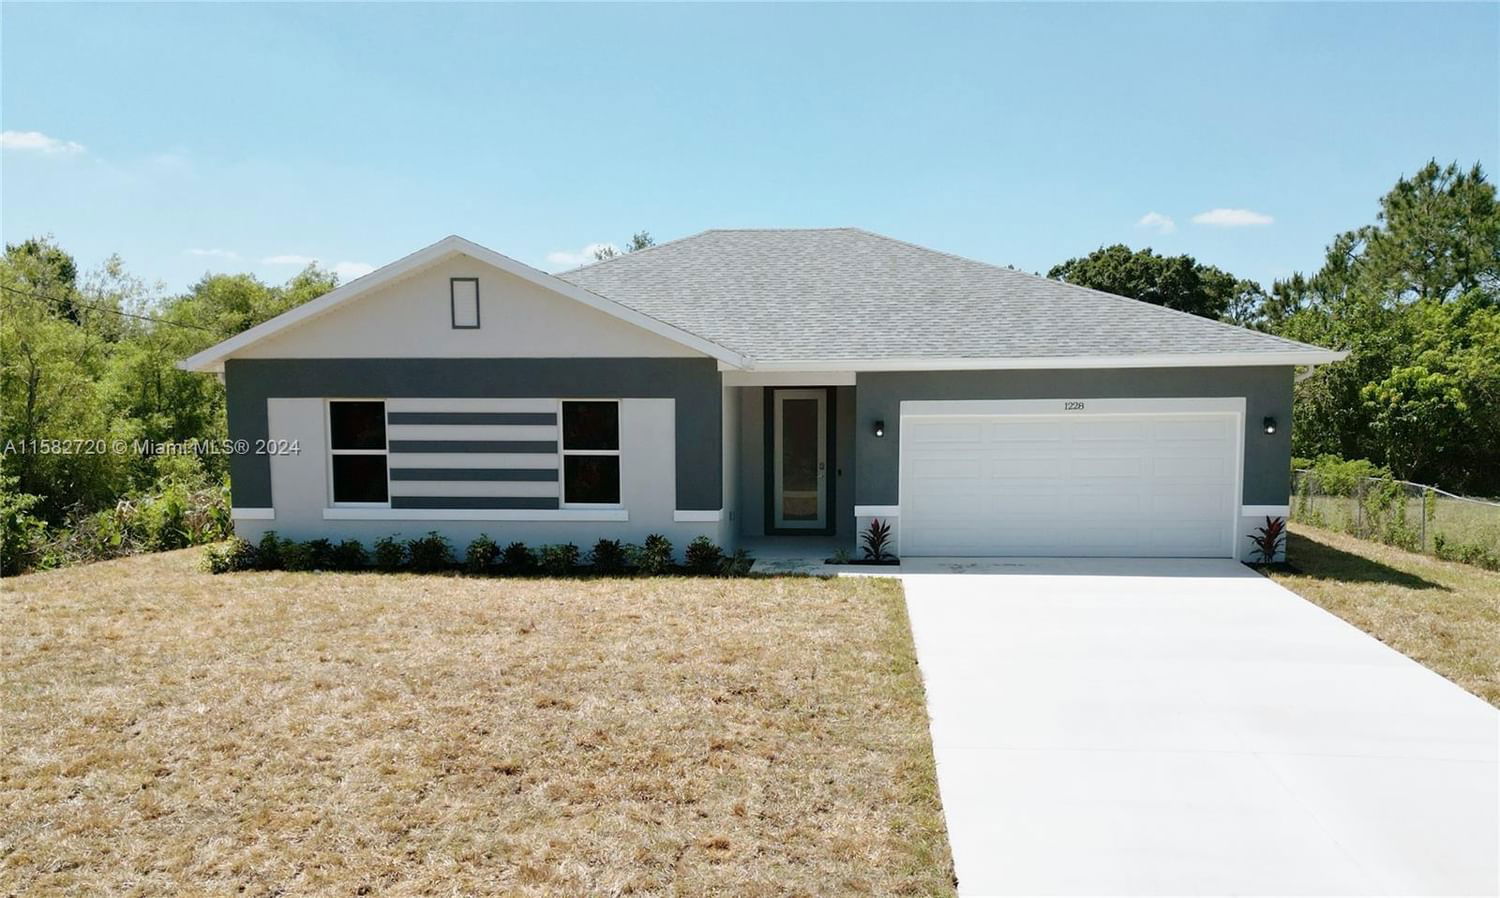 Real estate property located at 1228 Milwaukee, Lee County, Lehigh Acres, Lehigh Acres, FL